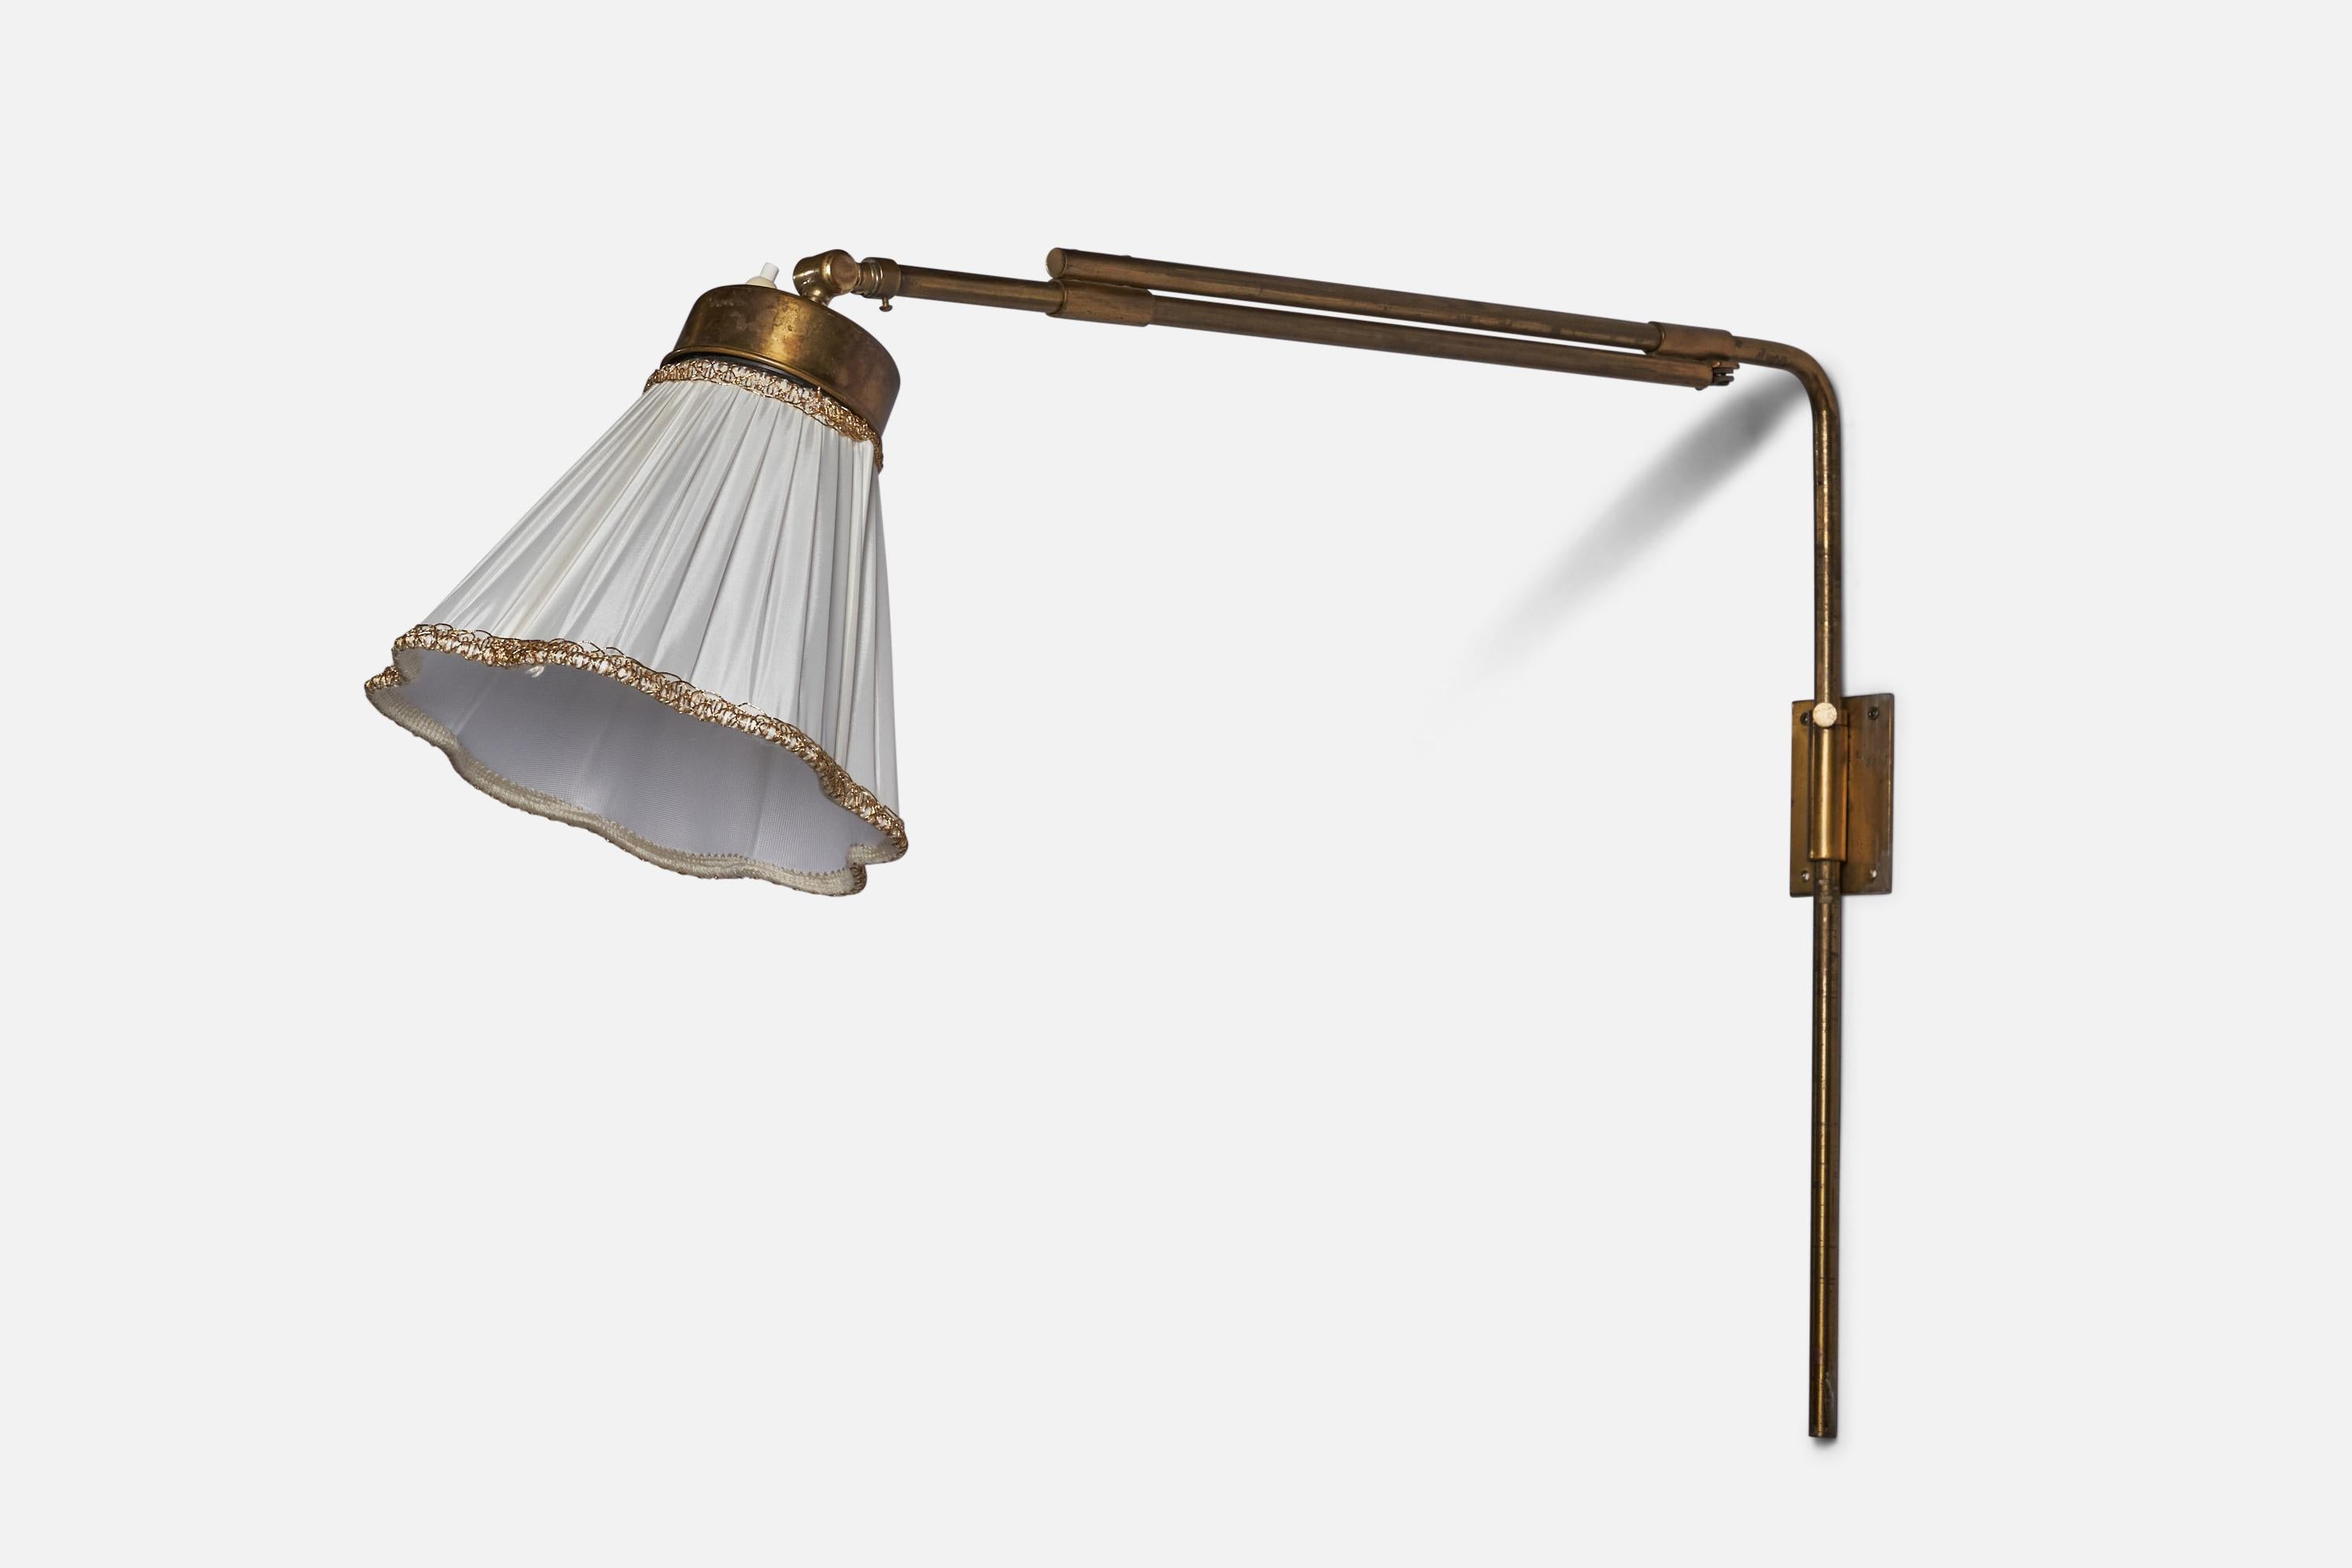 An adjustable brass and white silk fabric wall light designed by Josef Frank and produced by Svenskt Tenn, Sweden, 1940s.

Please note lamp functions by plug-in and cord feeds through stem connected to socket house.

Collapsed Dimensions (inches):